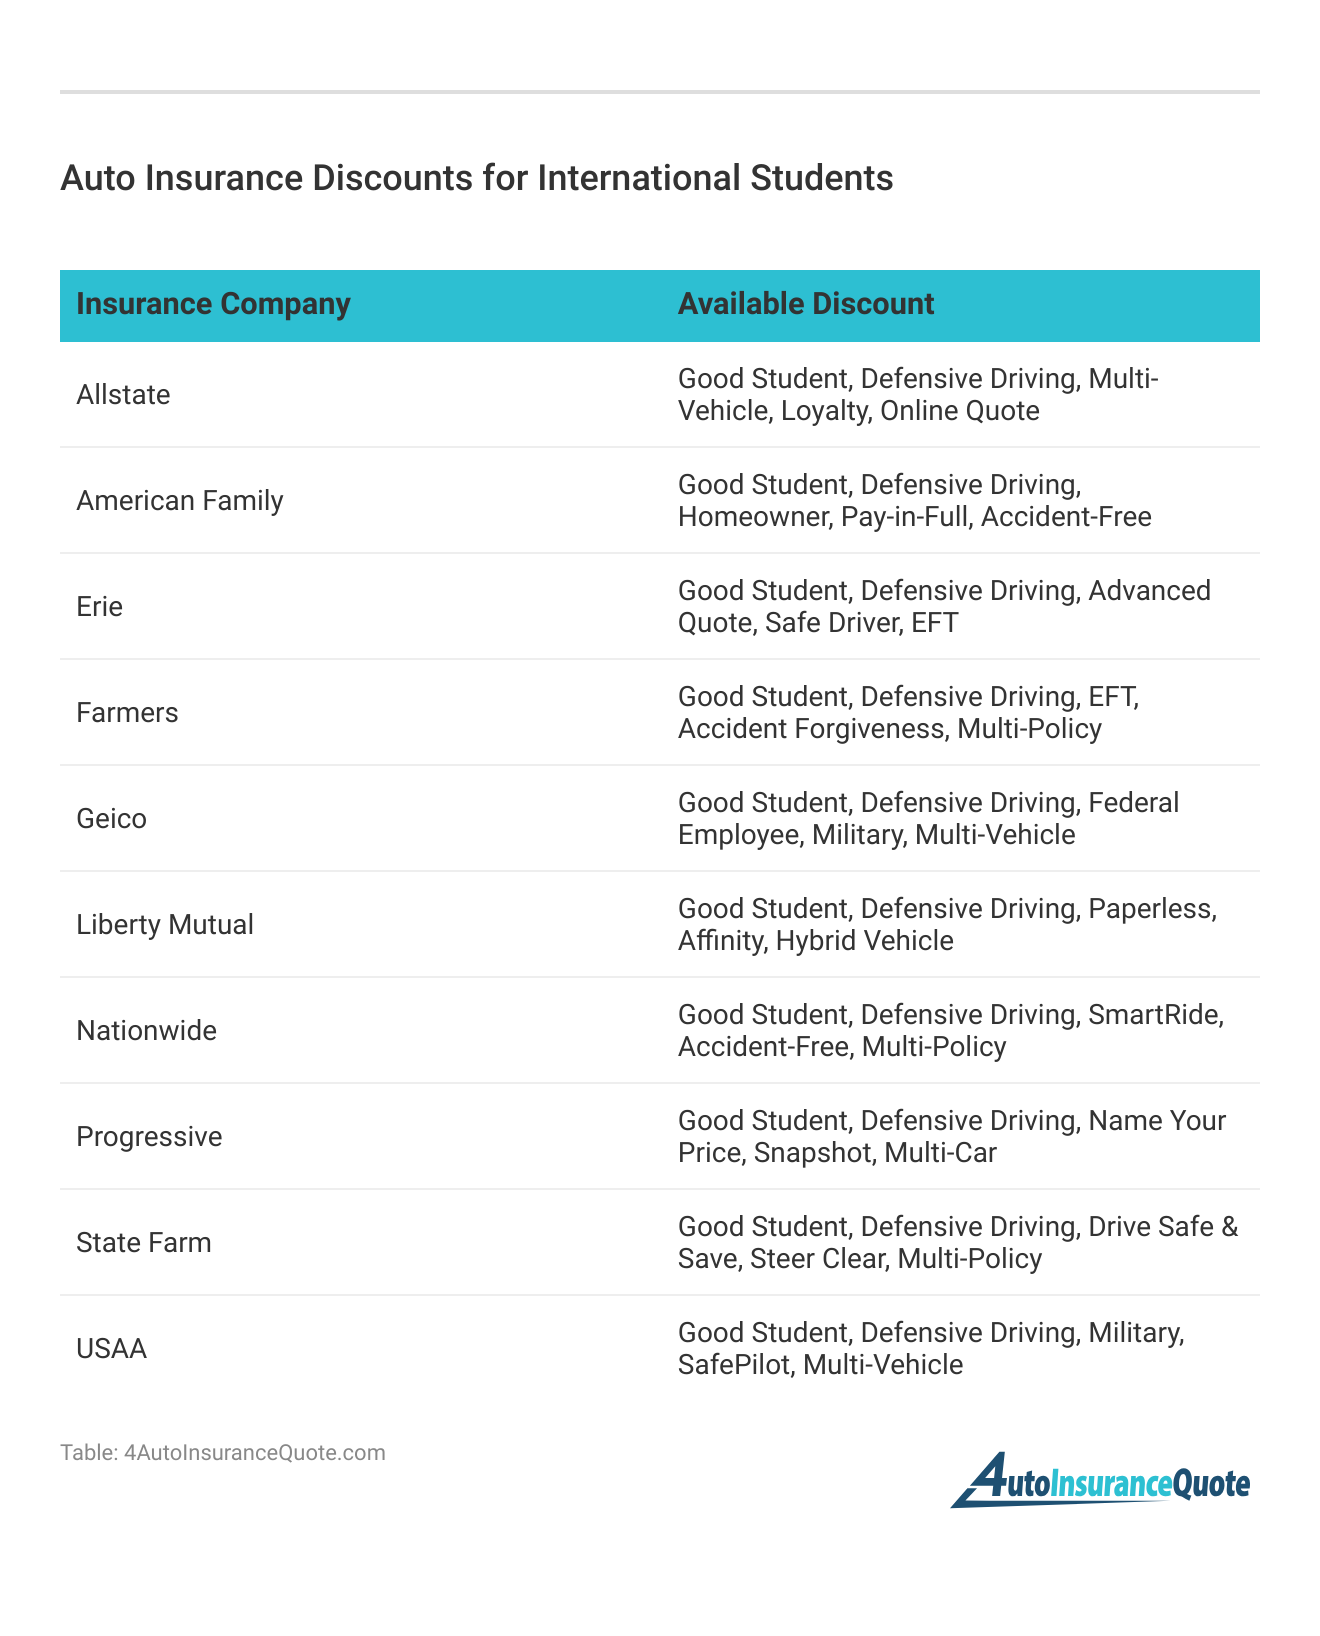 <h3>Auto Insurance Discounts for International Students</h3> 